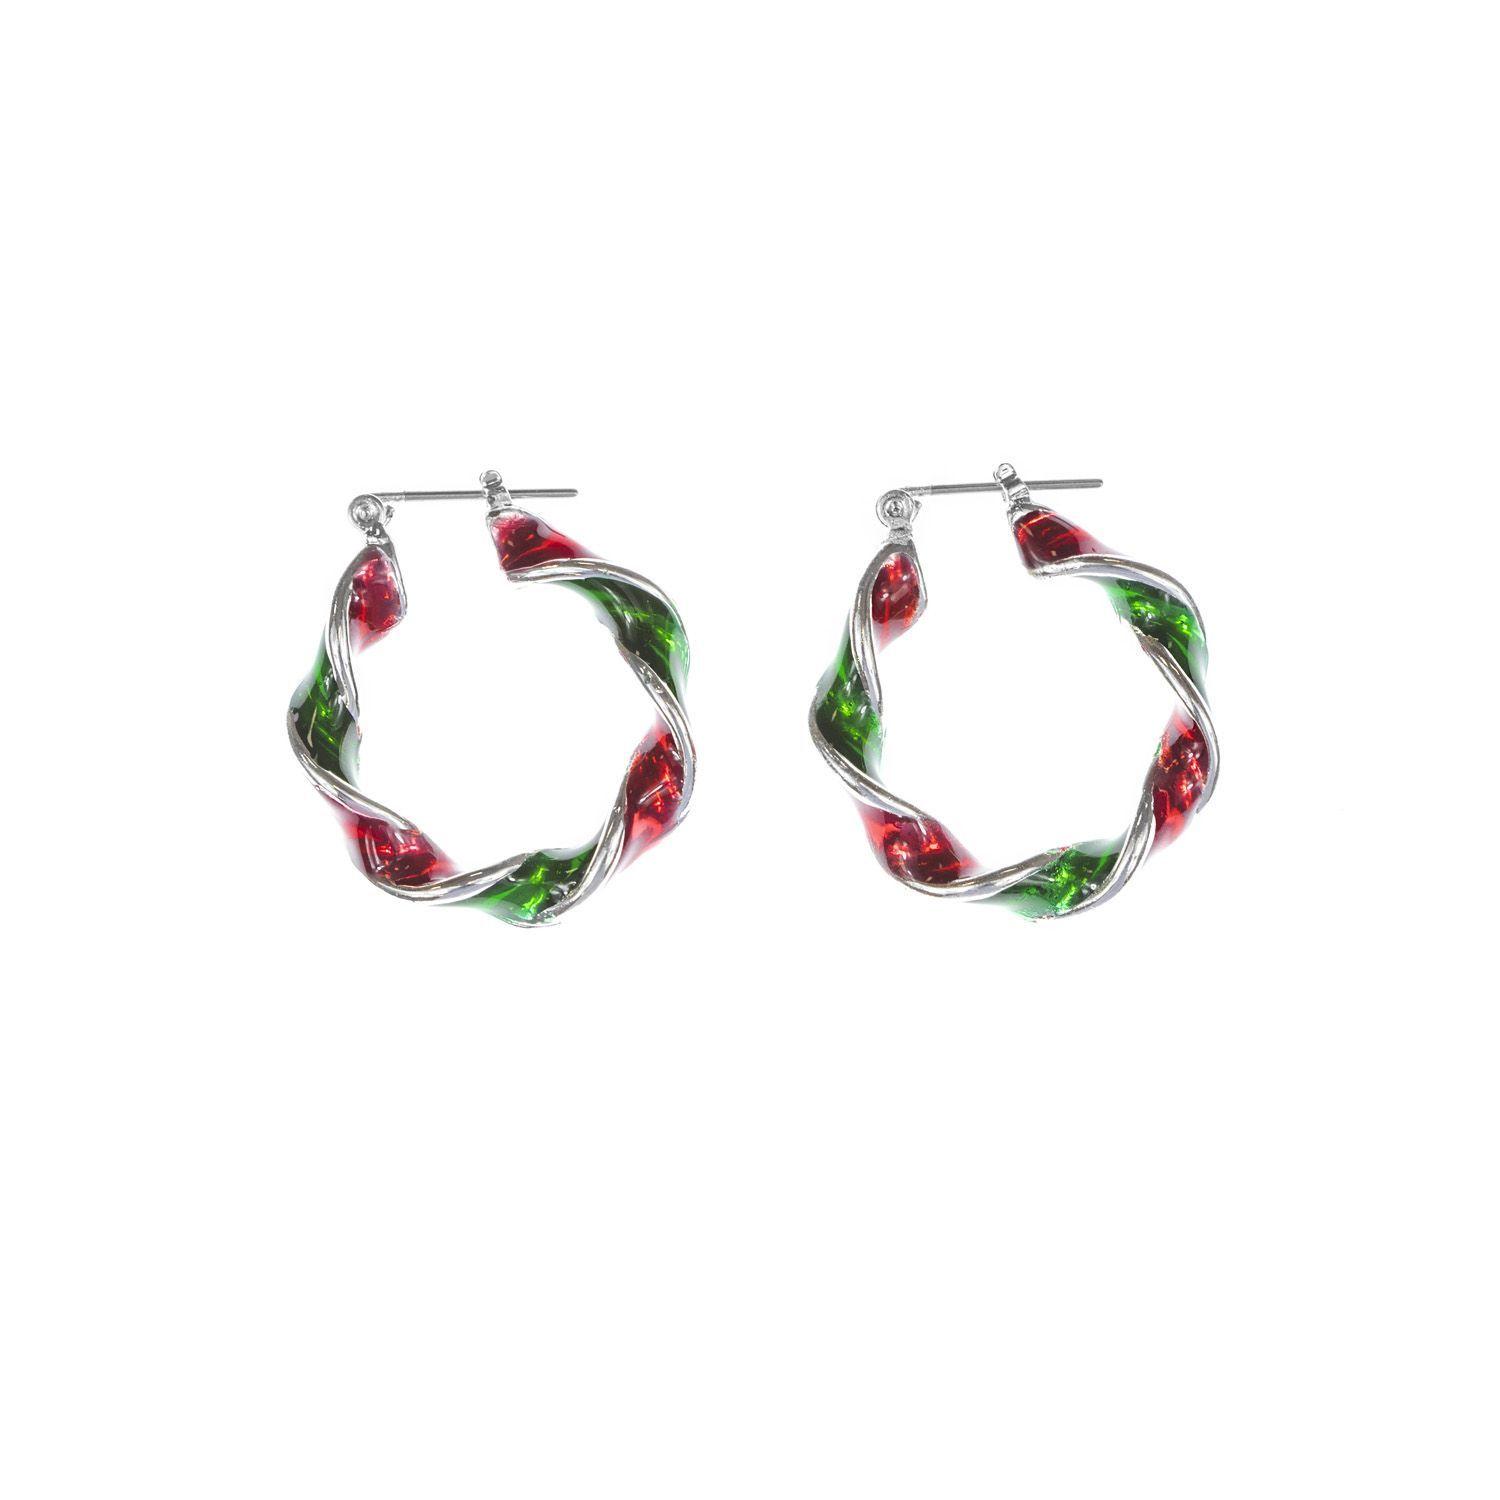 Red Green Twist Logo - SimplyWhispers: Allergy-Safe Hypoallergenic Jewelry, Nickel Free for ...